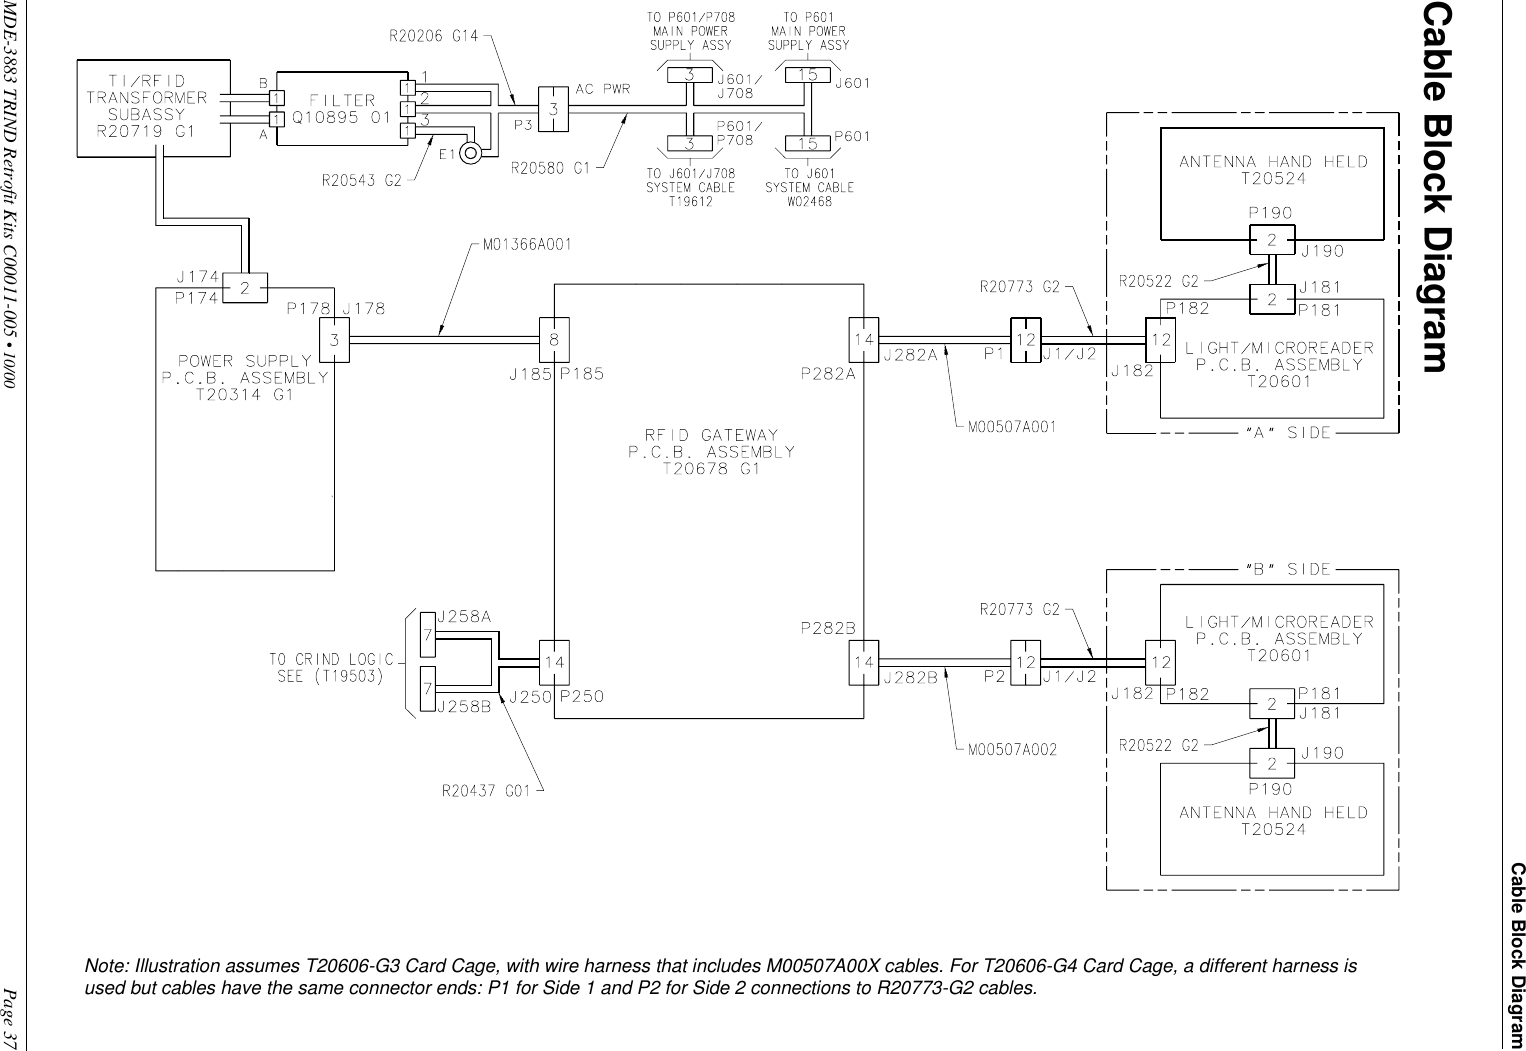 MDE-3883 TRIND Retrofit Kits C00011-005 • 10/00   Page 37Cable Block DiagramPRELIMINARYFCC 11/30Cable Block DiagramNote: Illustration assumes T20606-G3 Card Cage, with wire harness that includes M00507A00X cables. For T20606-G4 Card Cage, a different harness is used but cables have the same connector ends: P1 for Side 1 and P2 for Side 2 connections to R20773-G2 cables.